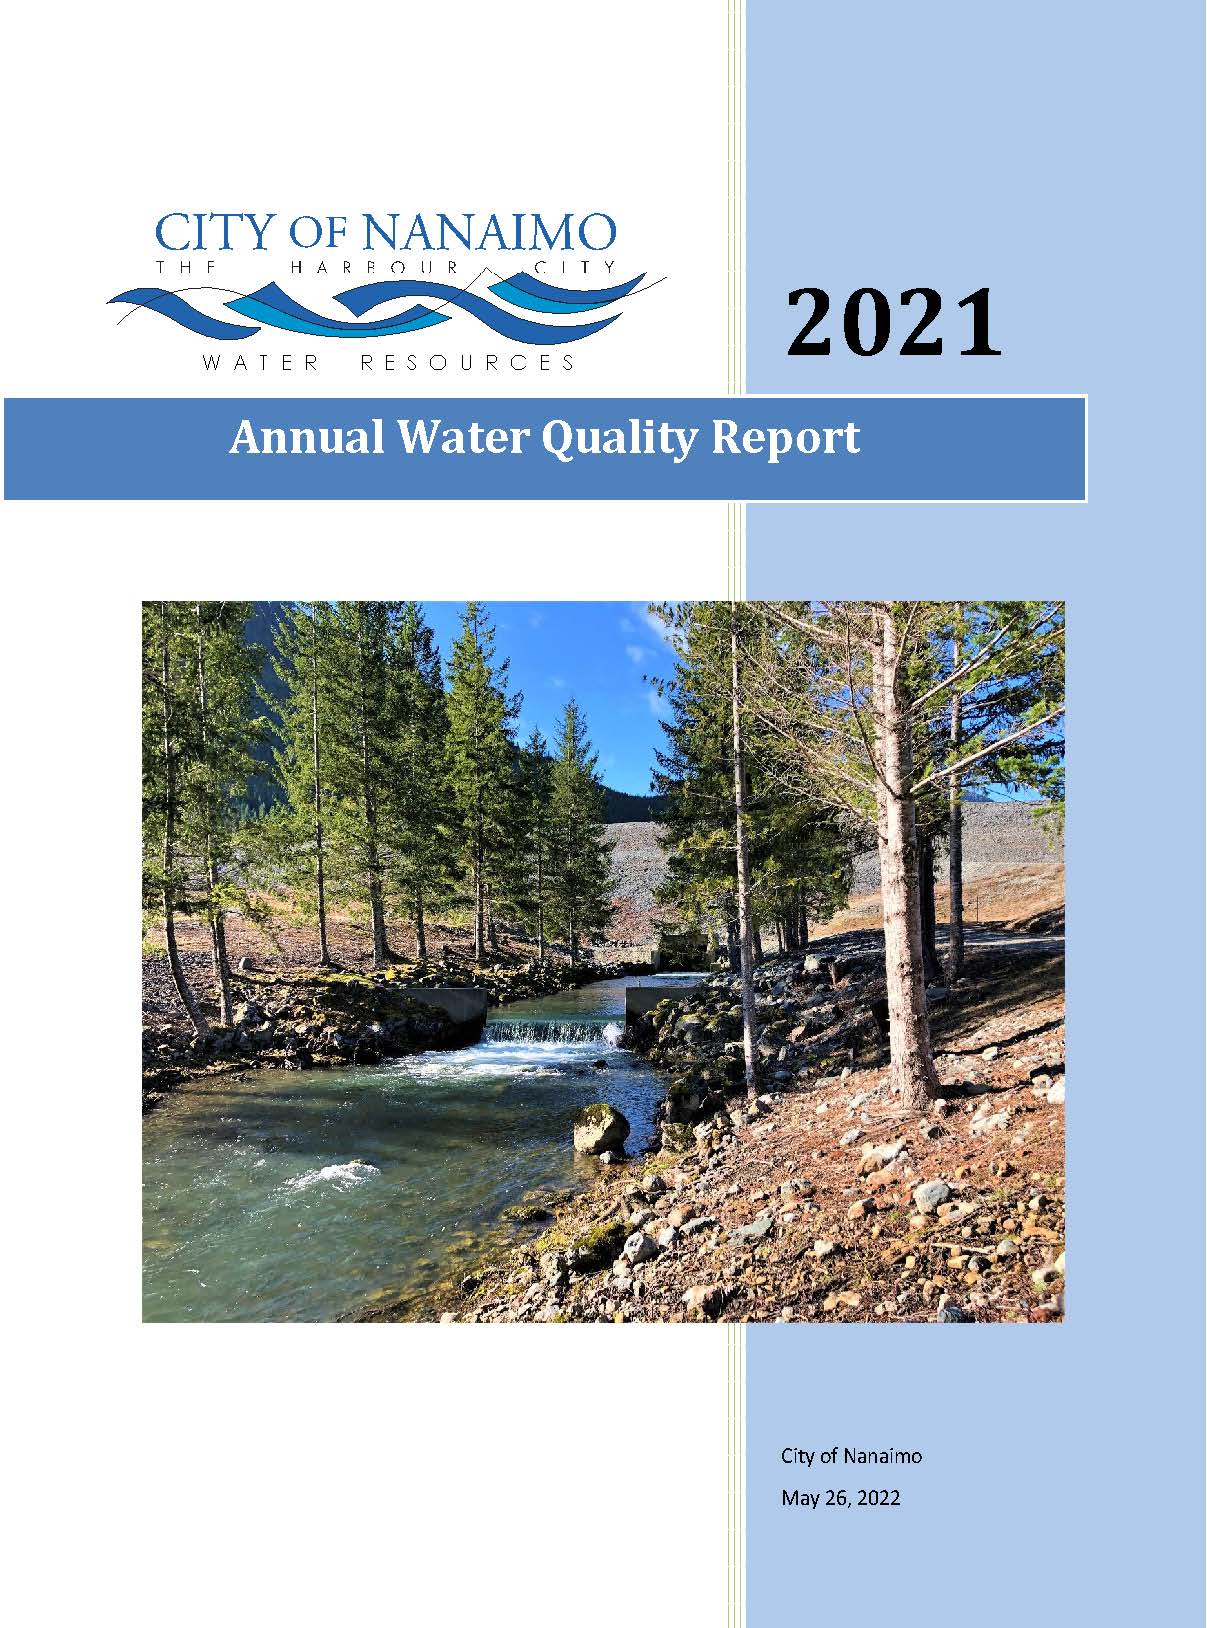 Annual Water Quality Report 2021